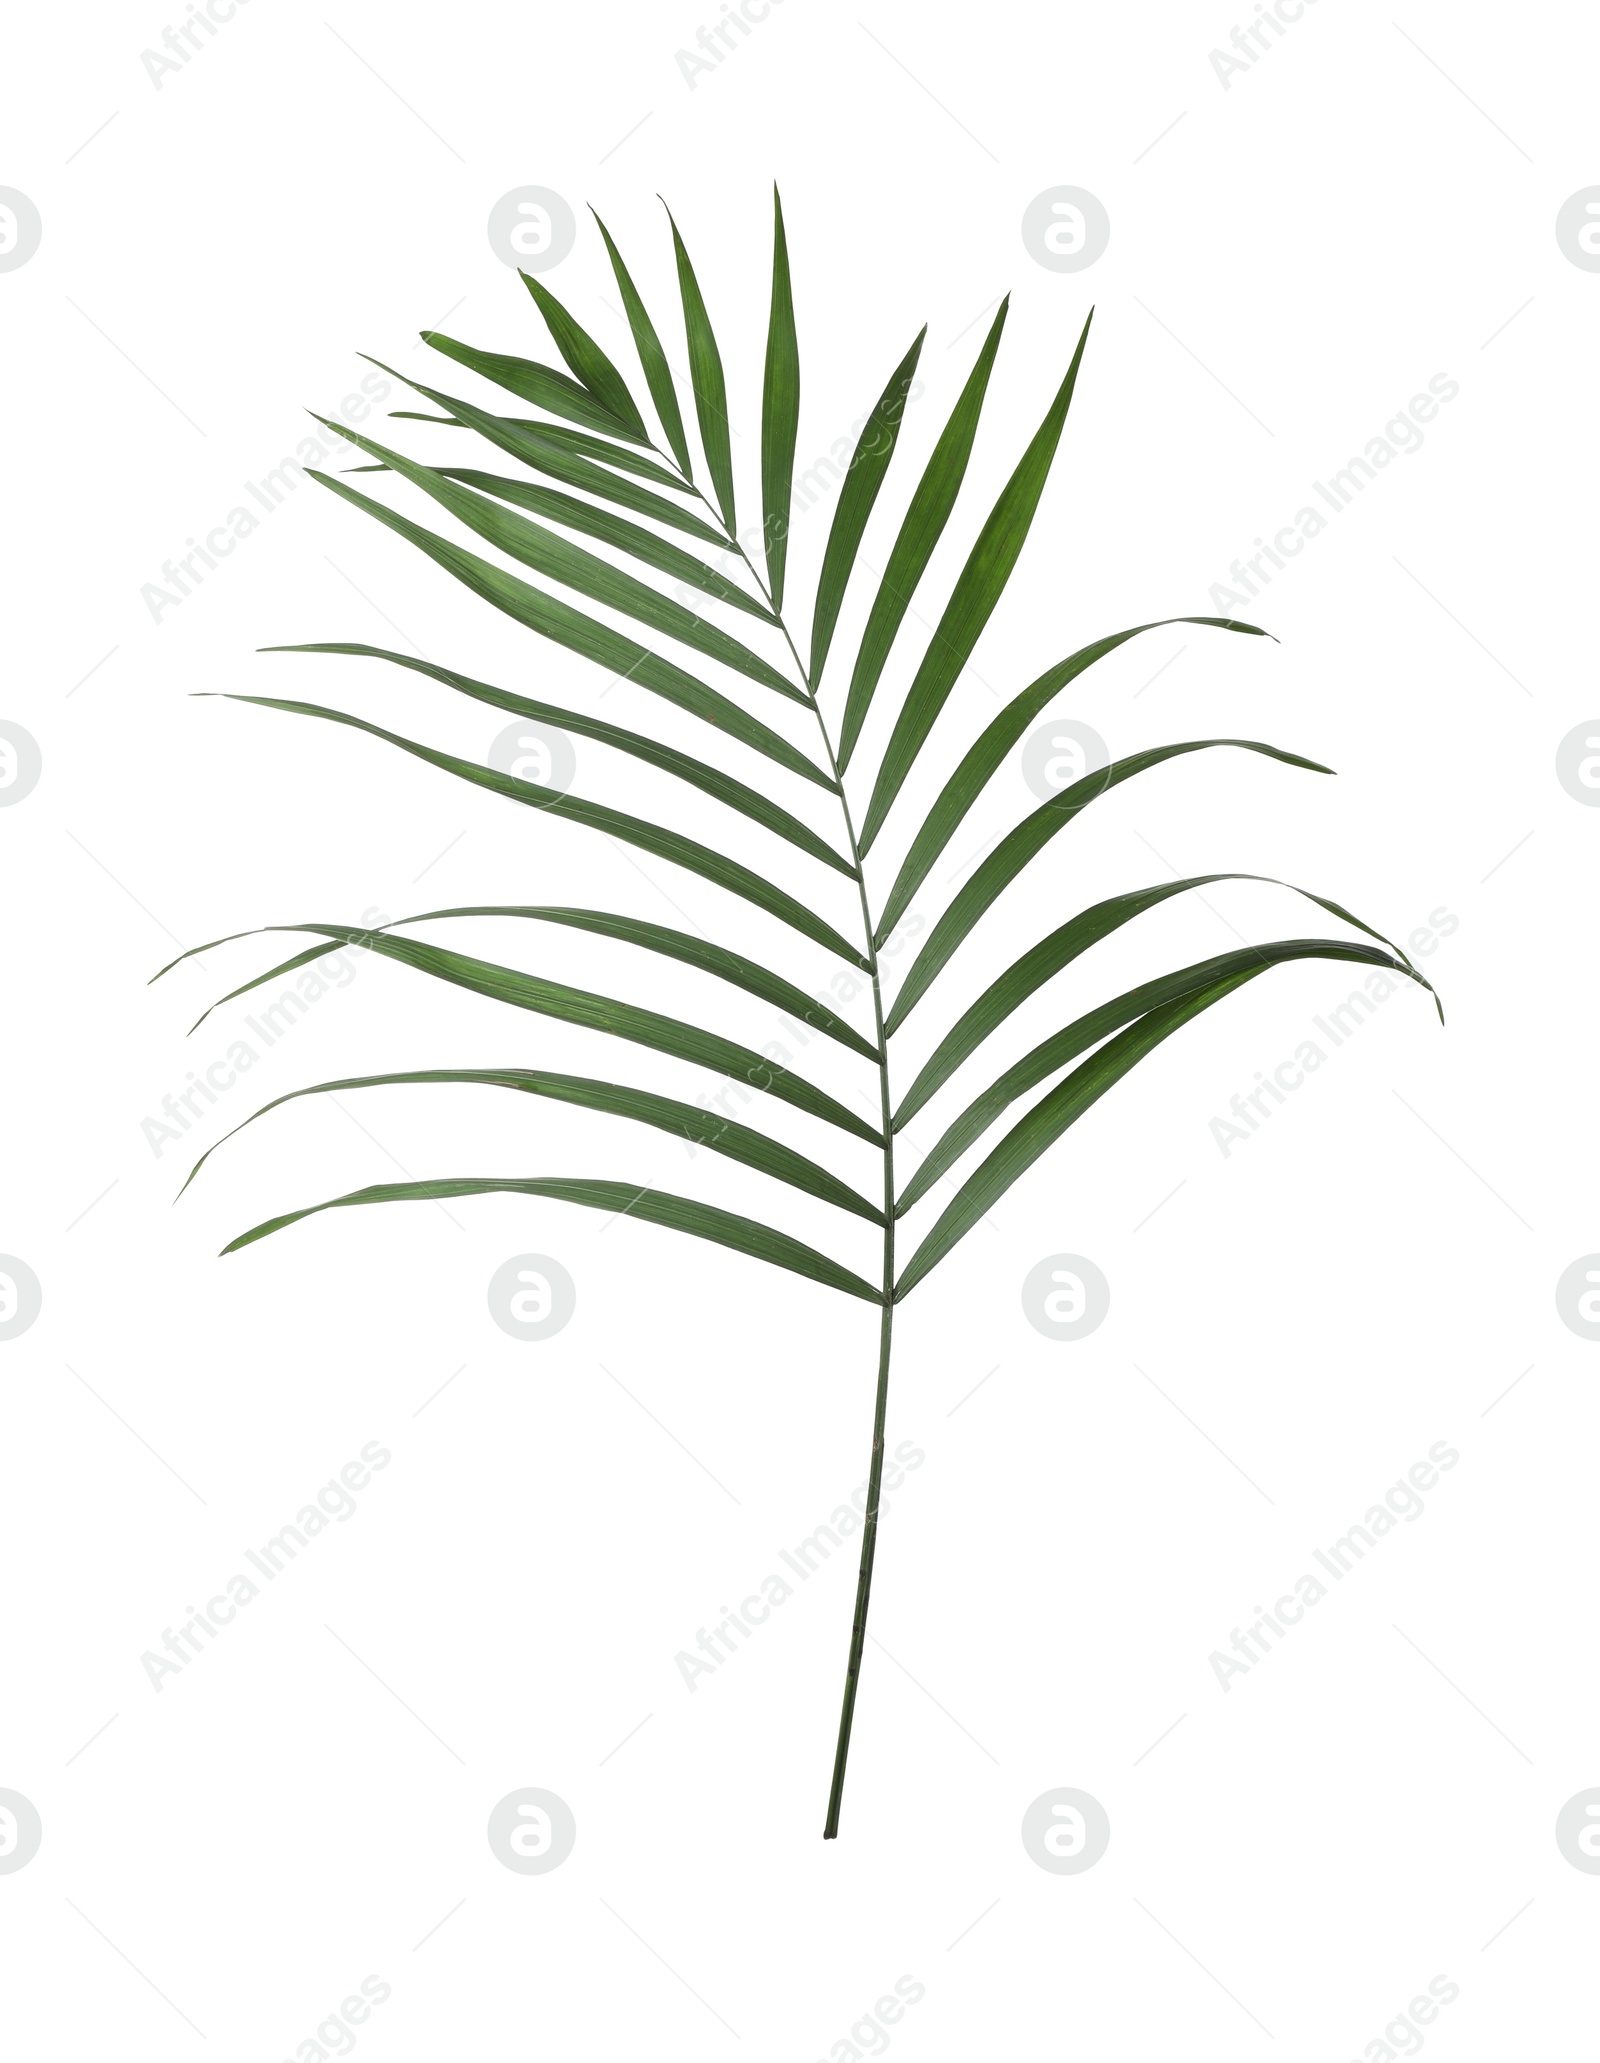 Photo of Leaf of tropical palm tree isolated on white